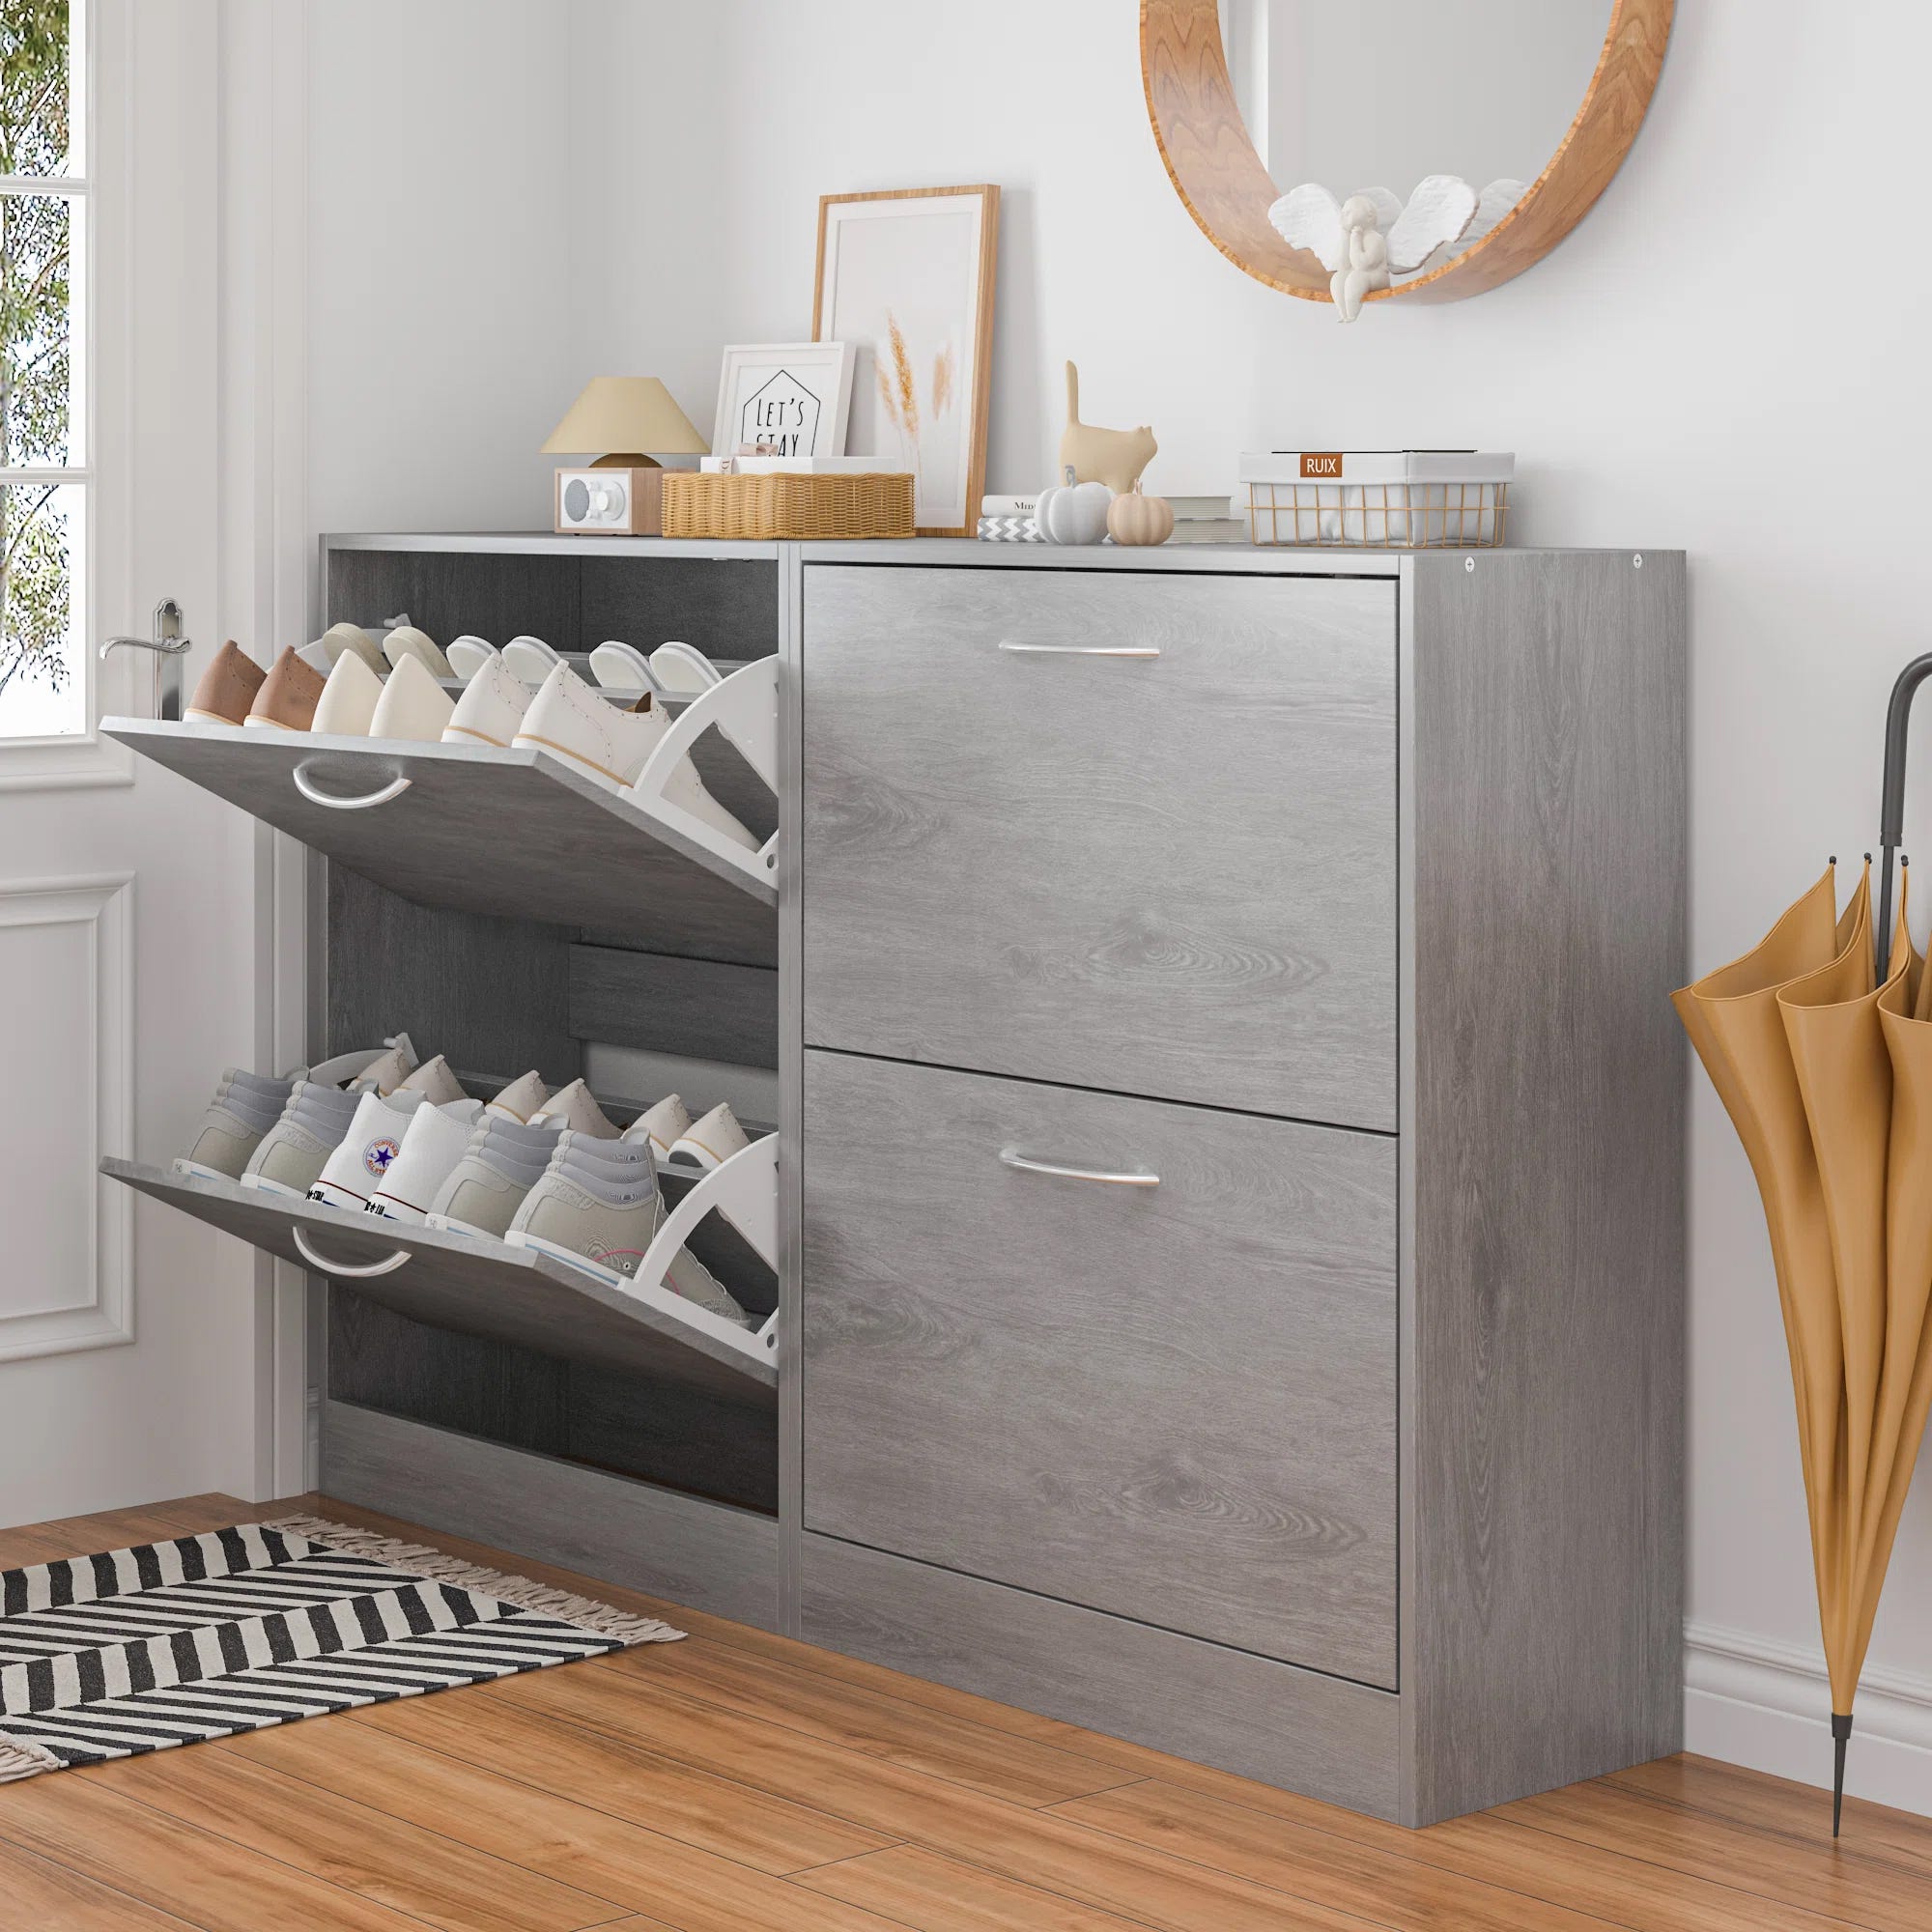 A grey shoe cabinet with pull-down drawers displaying various shoes and a decorative mirror and accessories on top.